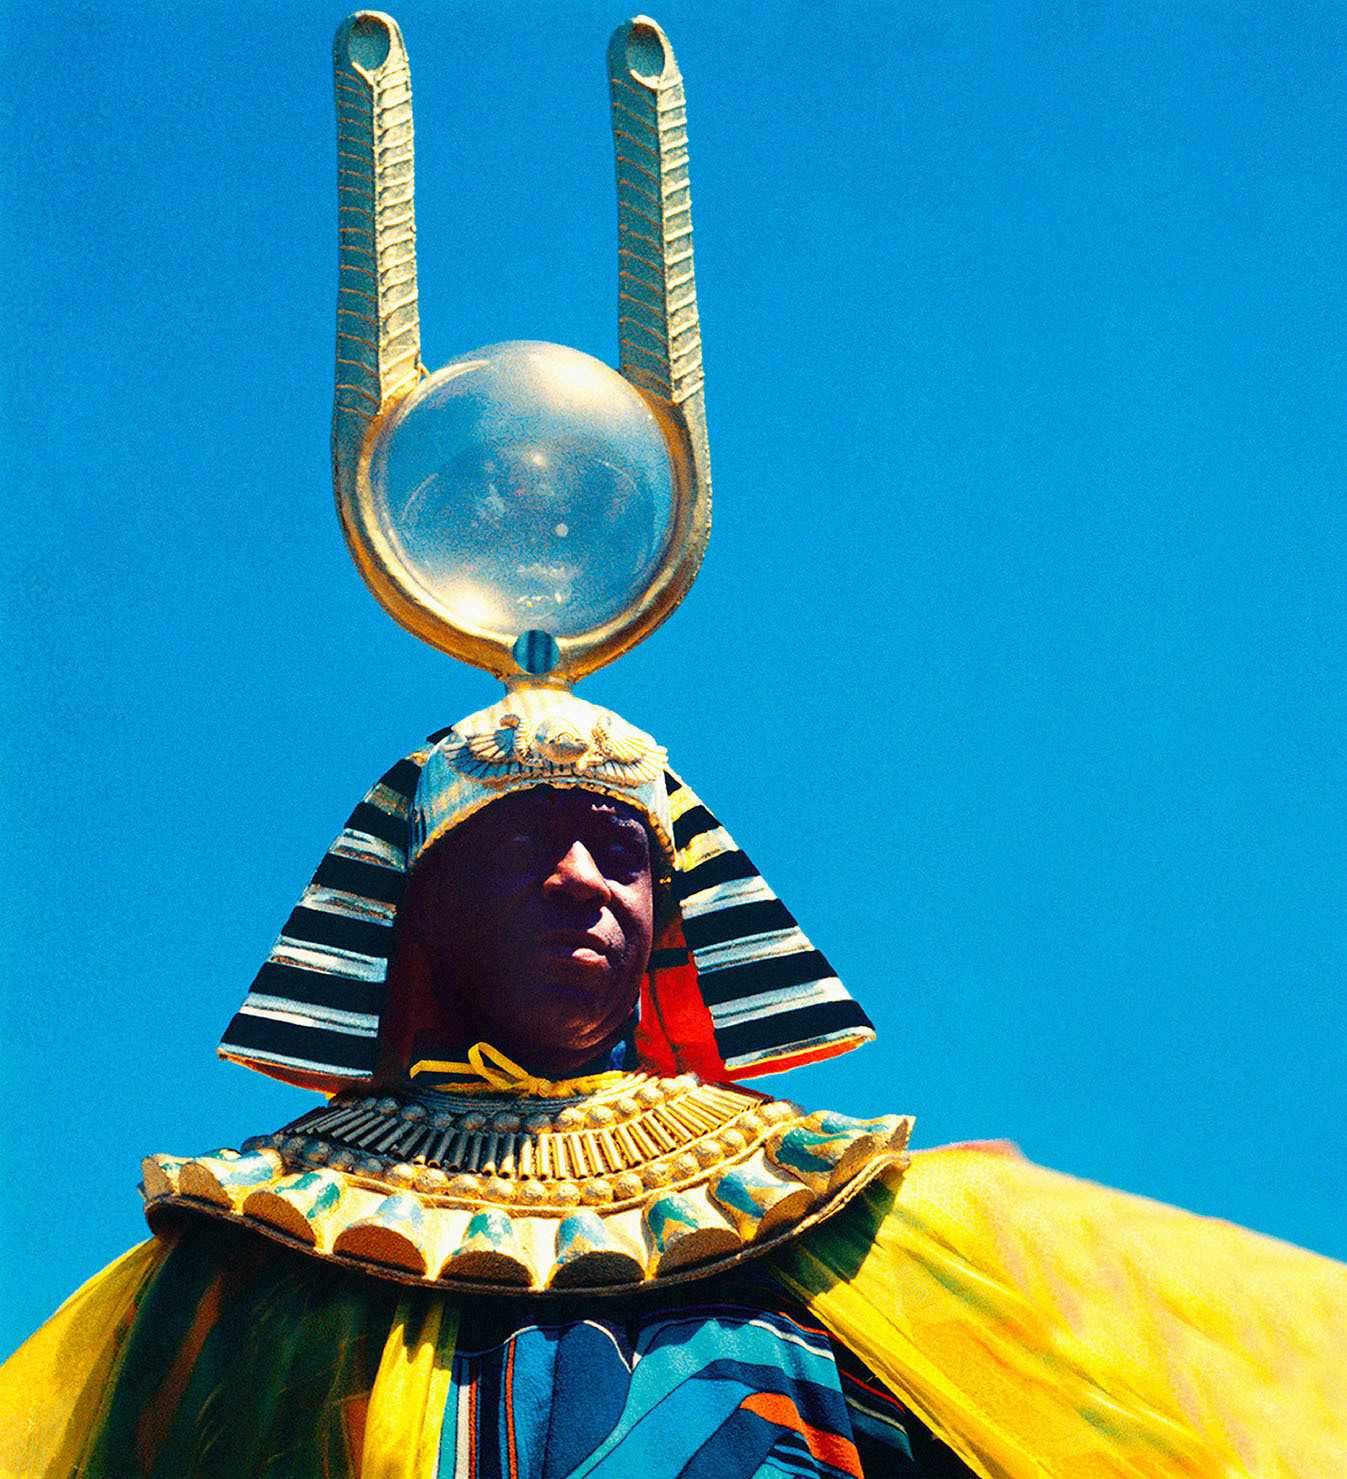 Sun Ra, a black alien , is dressed in a pharaoh looking headdress and colorful yellow costume.